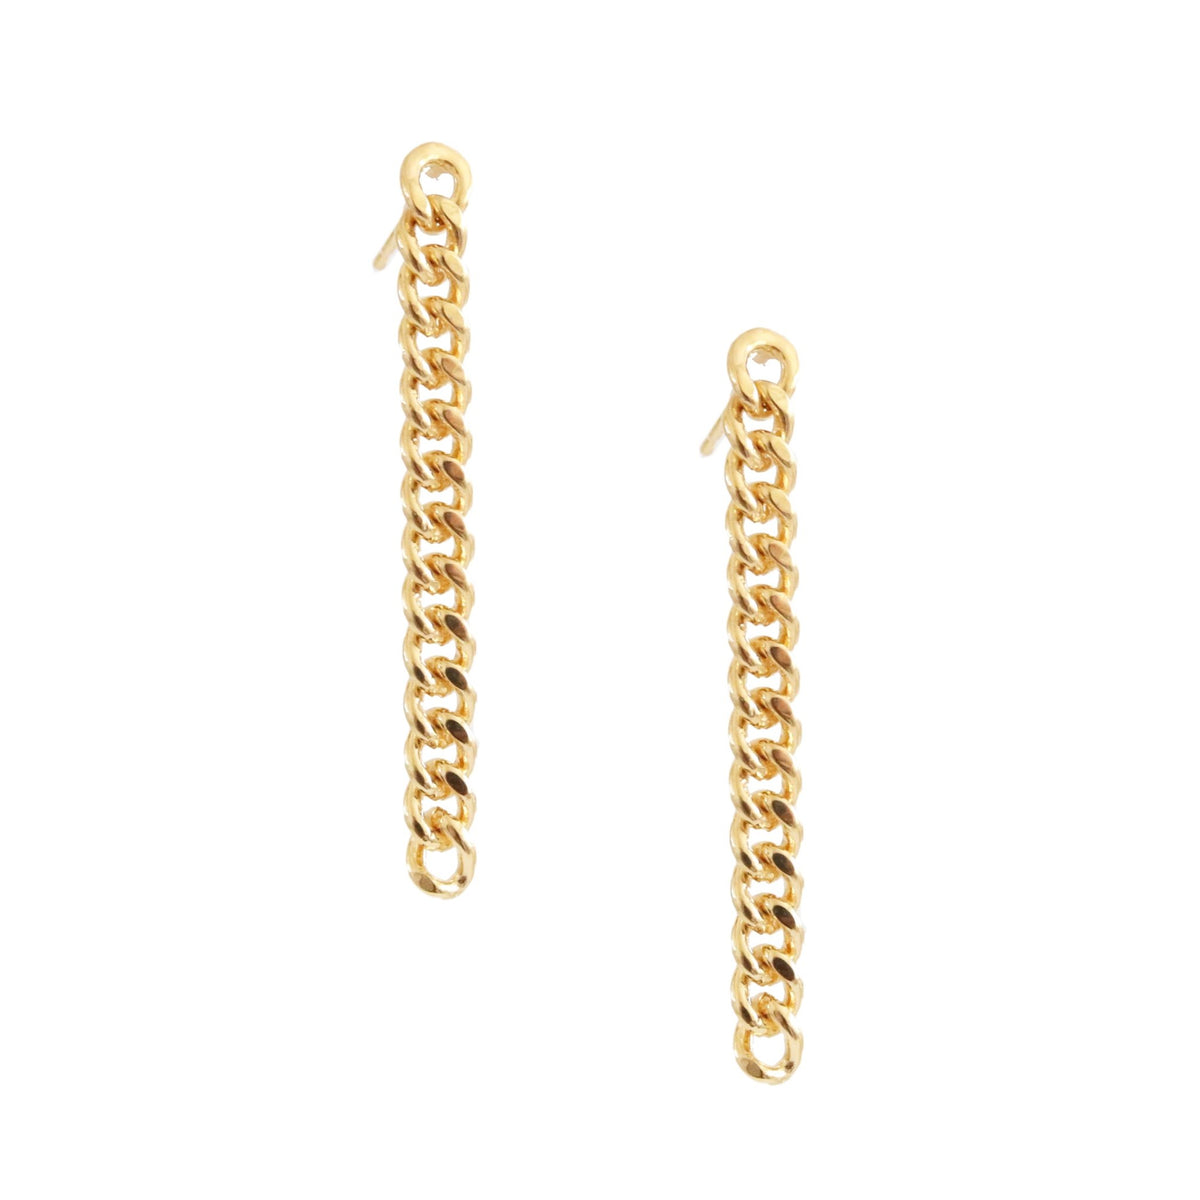 POISE CABLE LINK CHAIN DROP STUDS - GOLD - SO PRETTY CARA COTTER